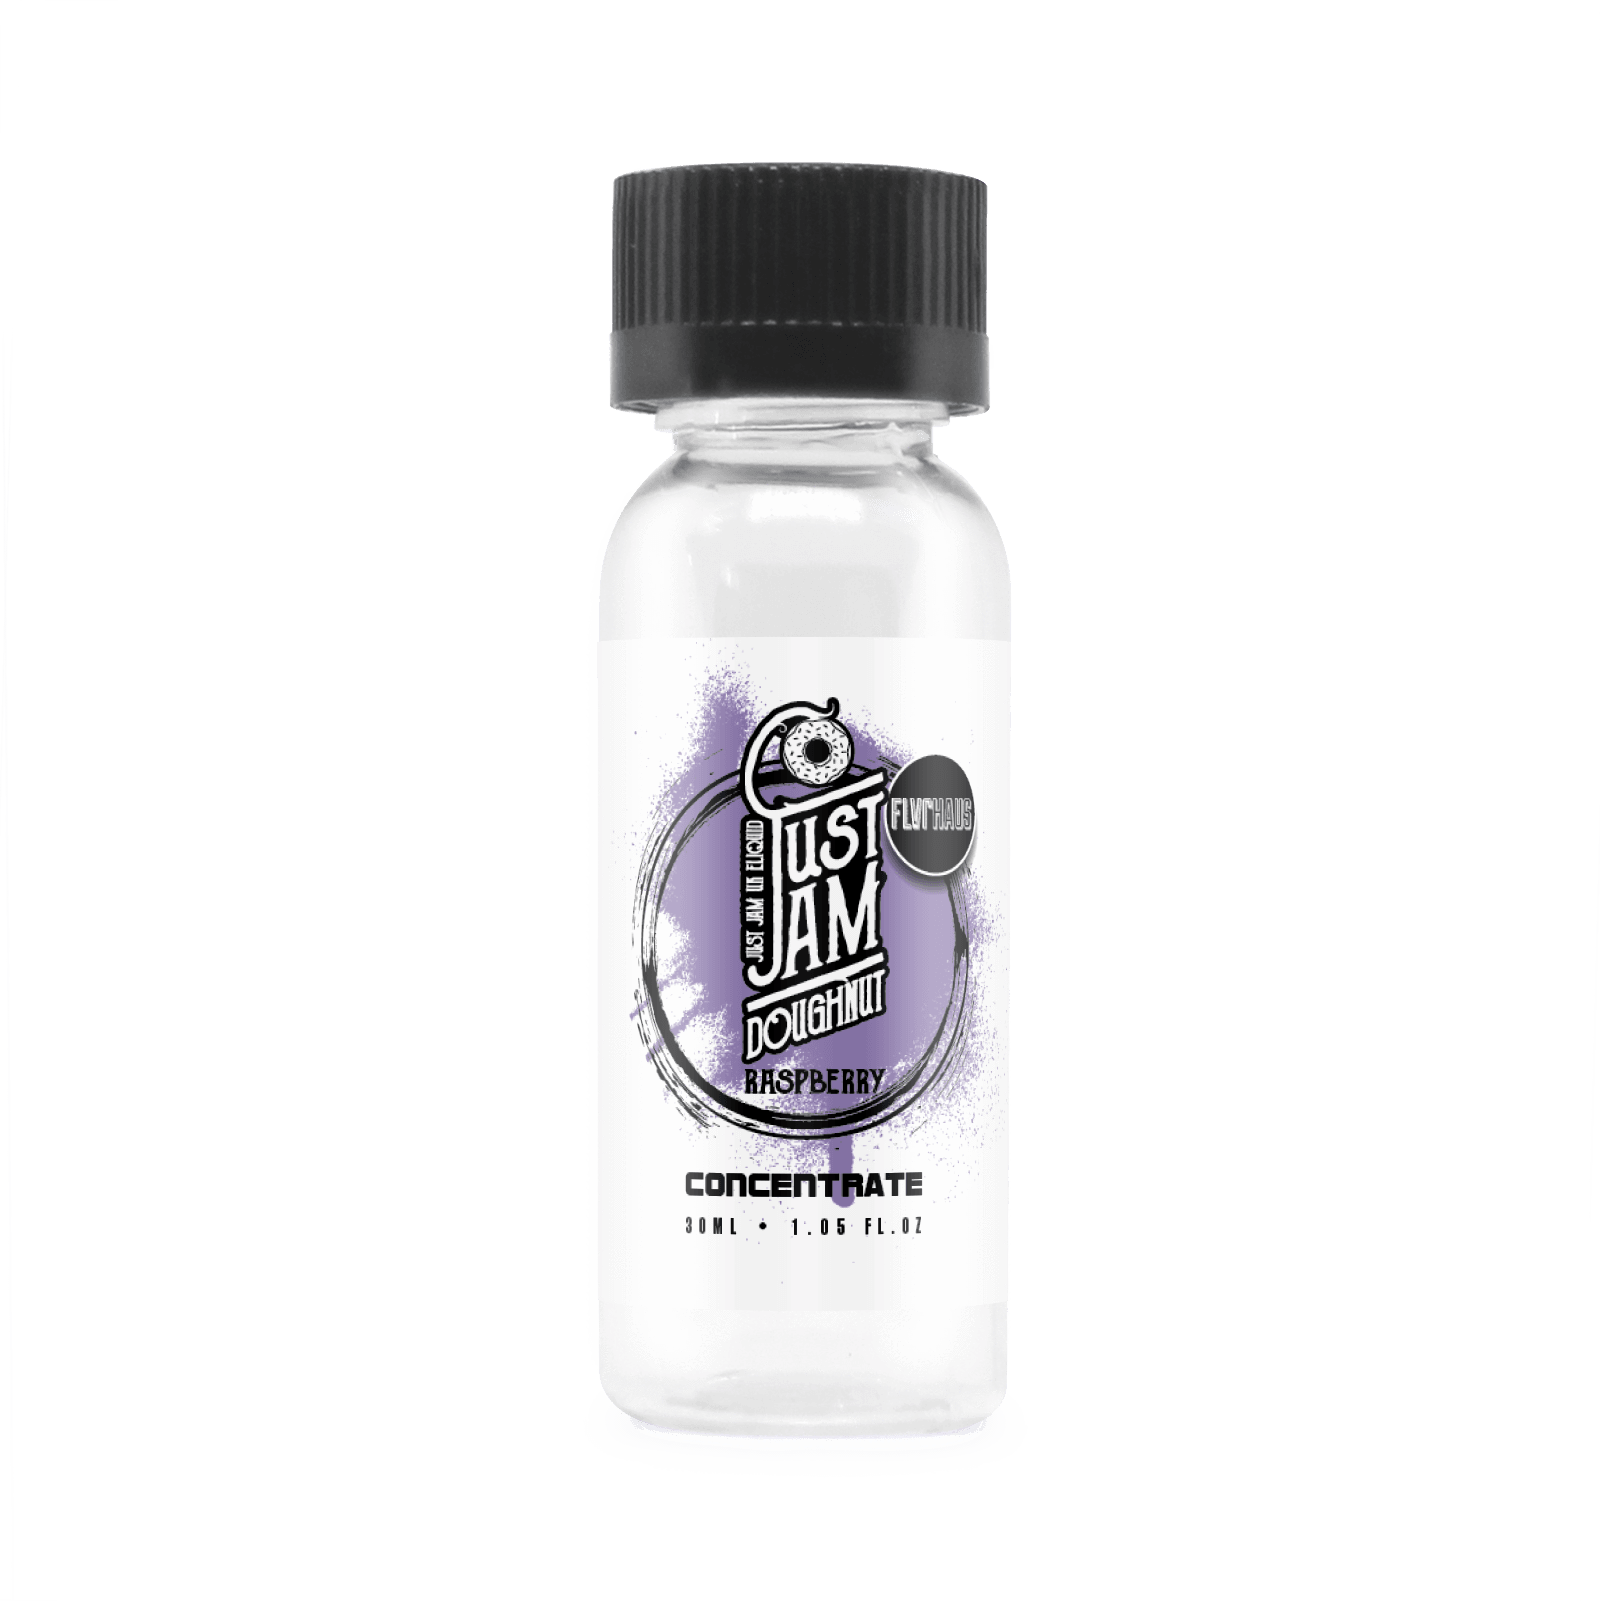 Just Jam - Raspberry Doughnut Concentrate 30ml - The Ace Of Vapez